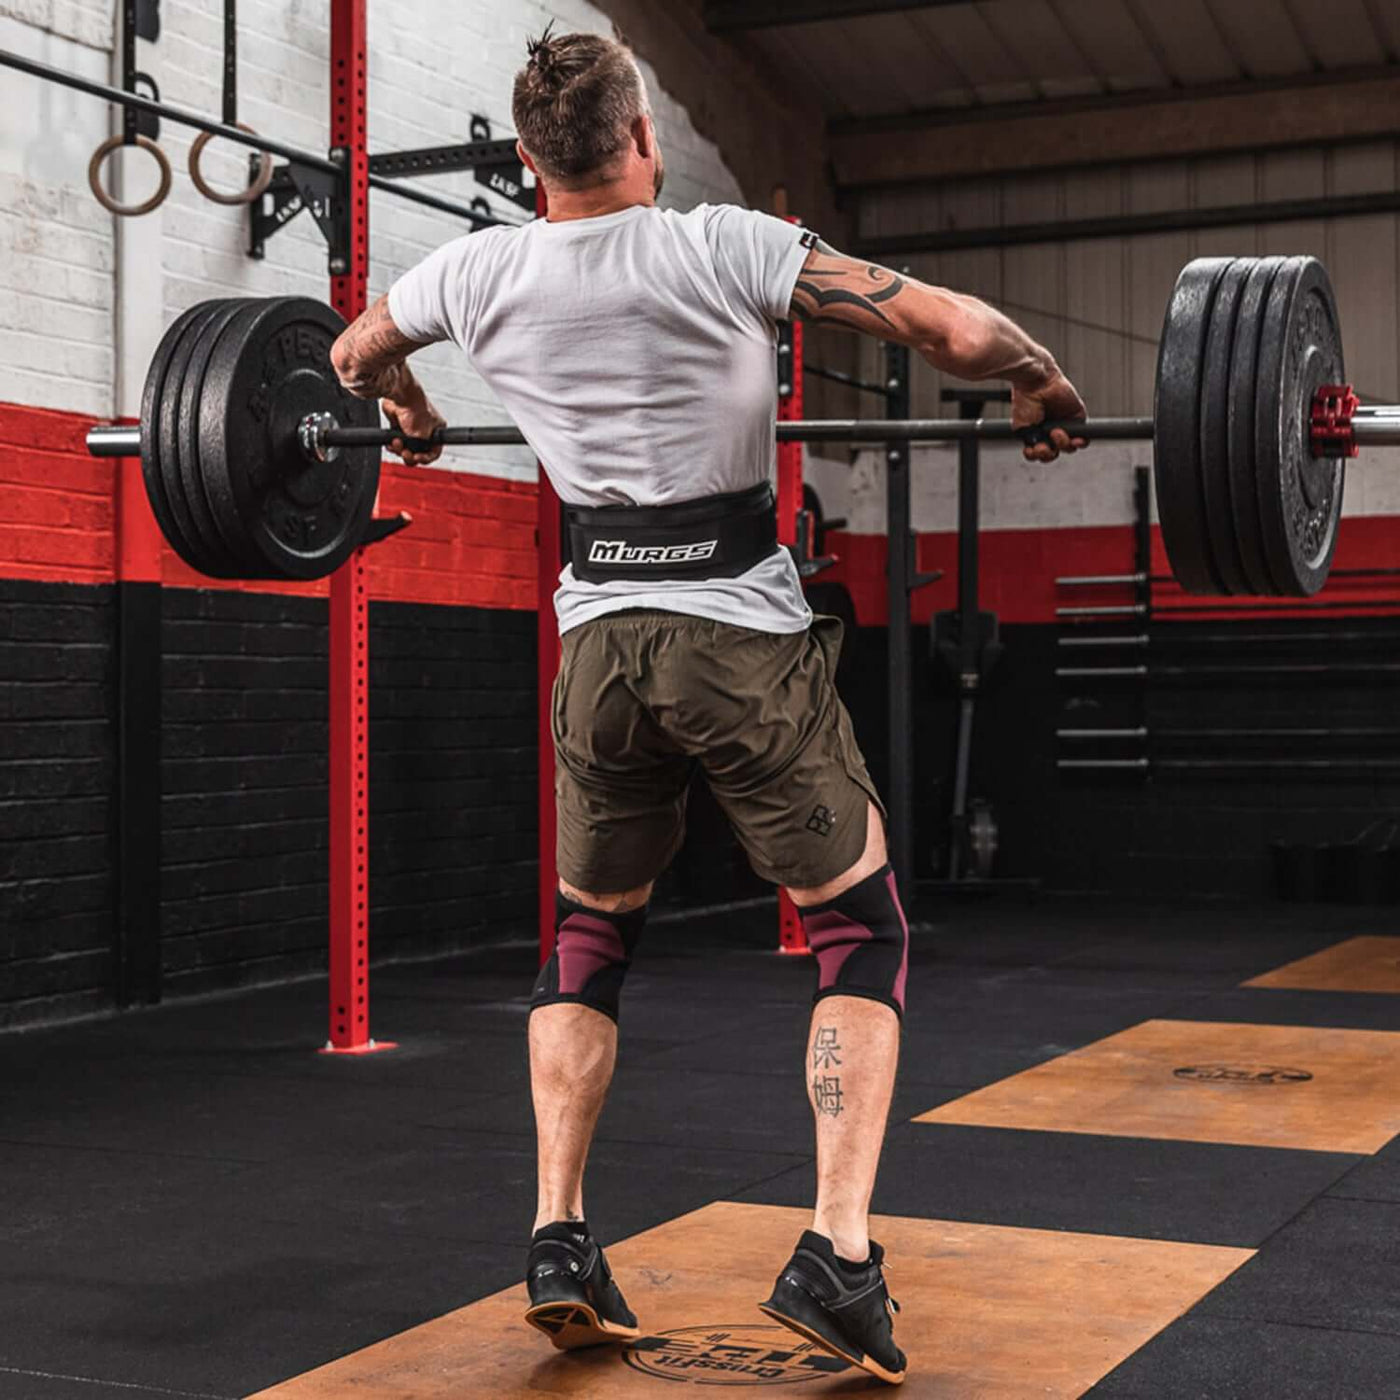 Male athlete performing snatch in a 5 inch Murgs nylon belt